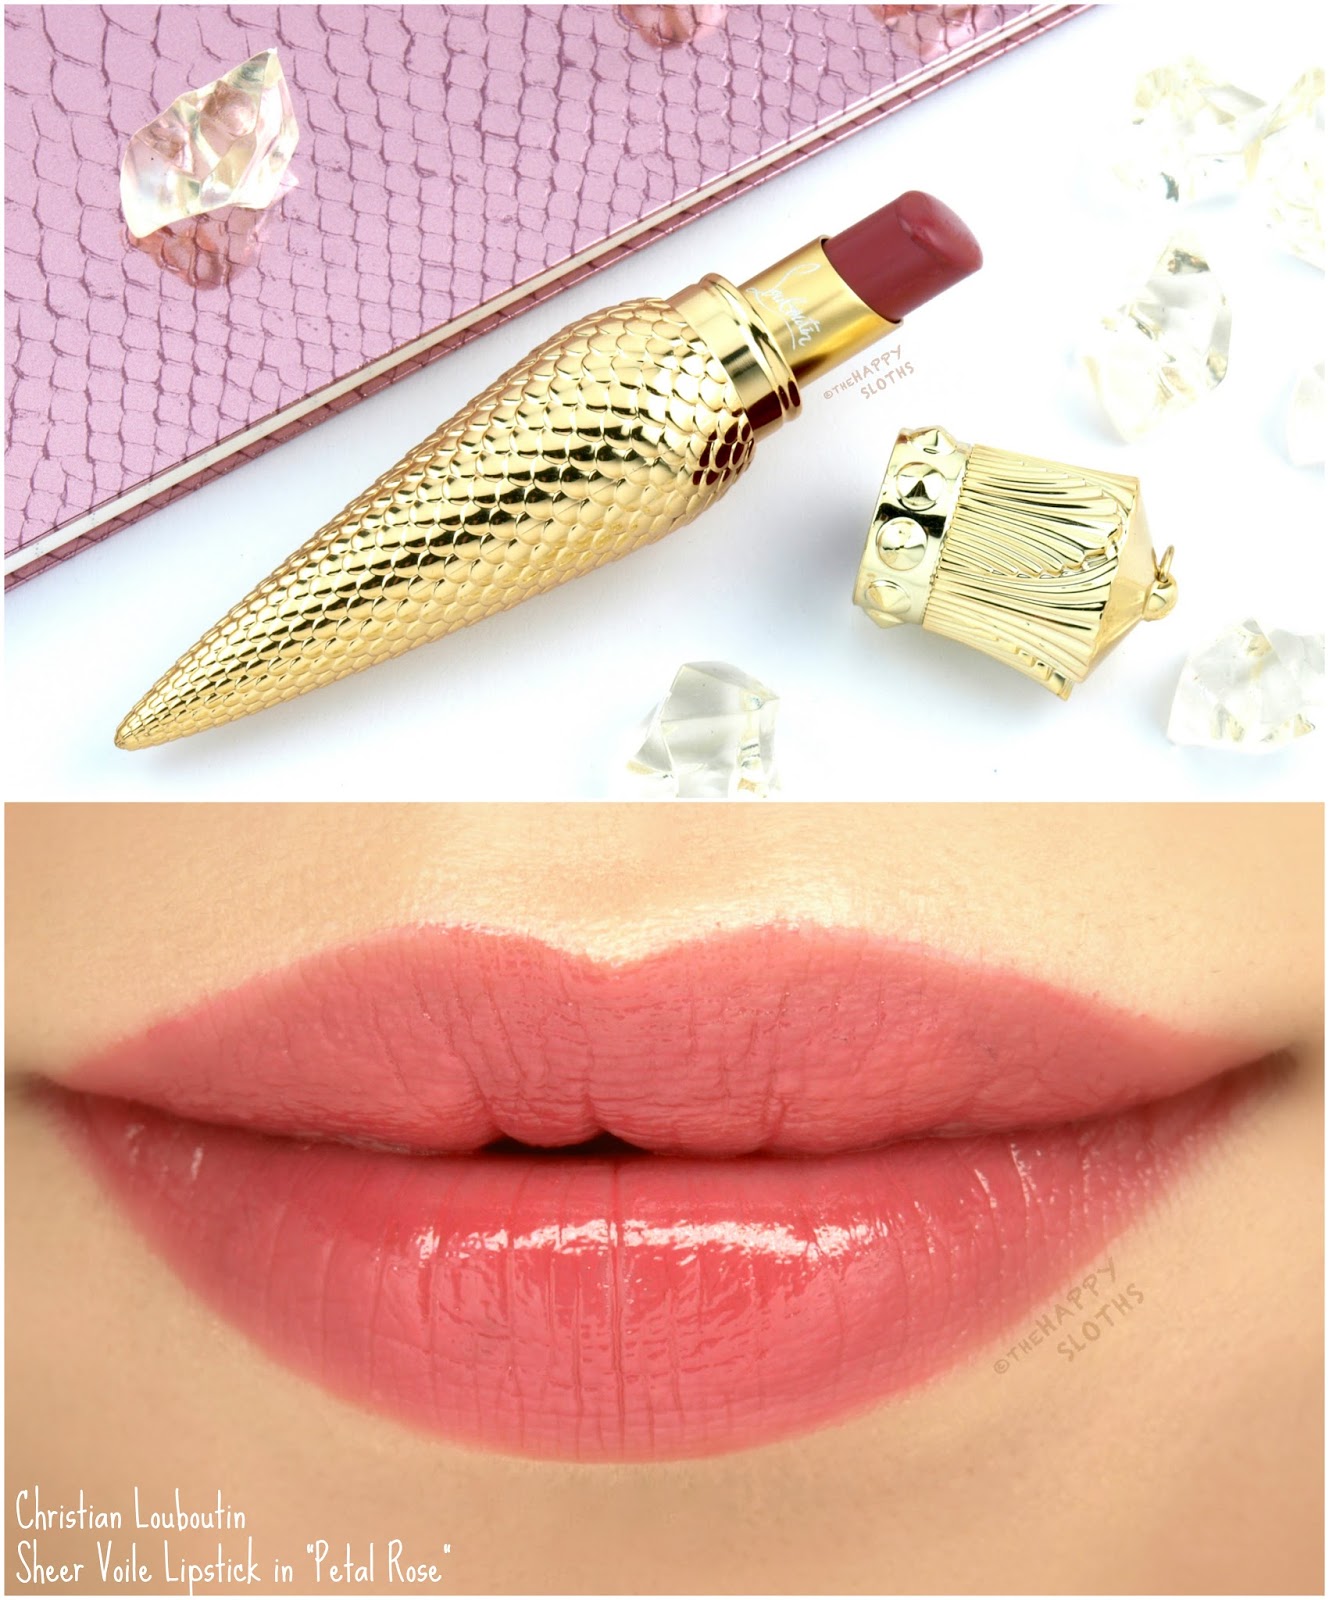 Christian Louboutin Sheer Voile Lipstick in Petal Rose: Review